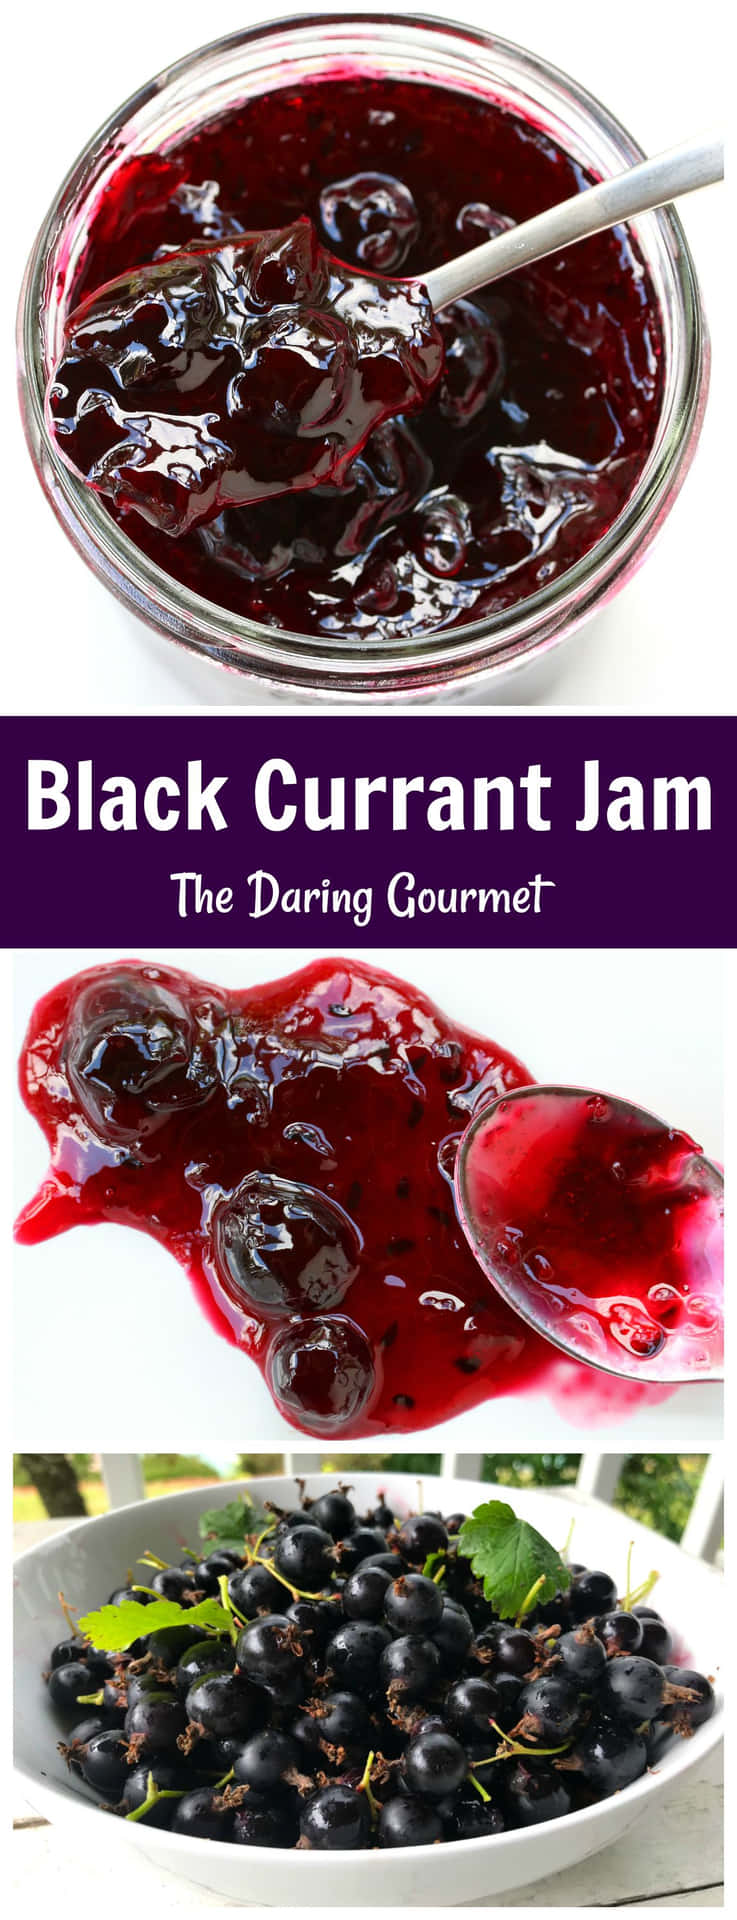 "Detailing the Plump and Fruity Texture of Black Currants" Wallpaper